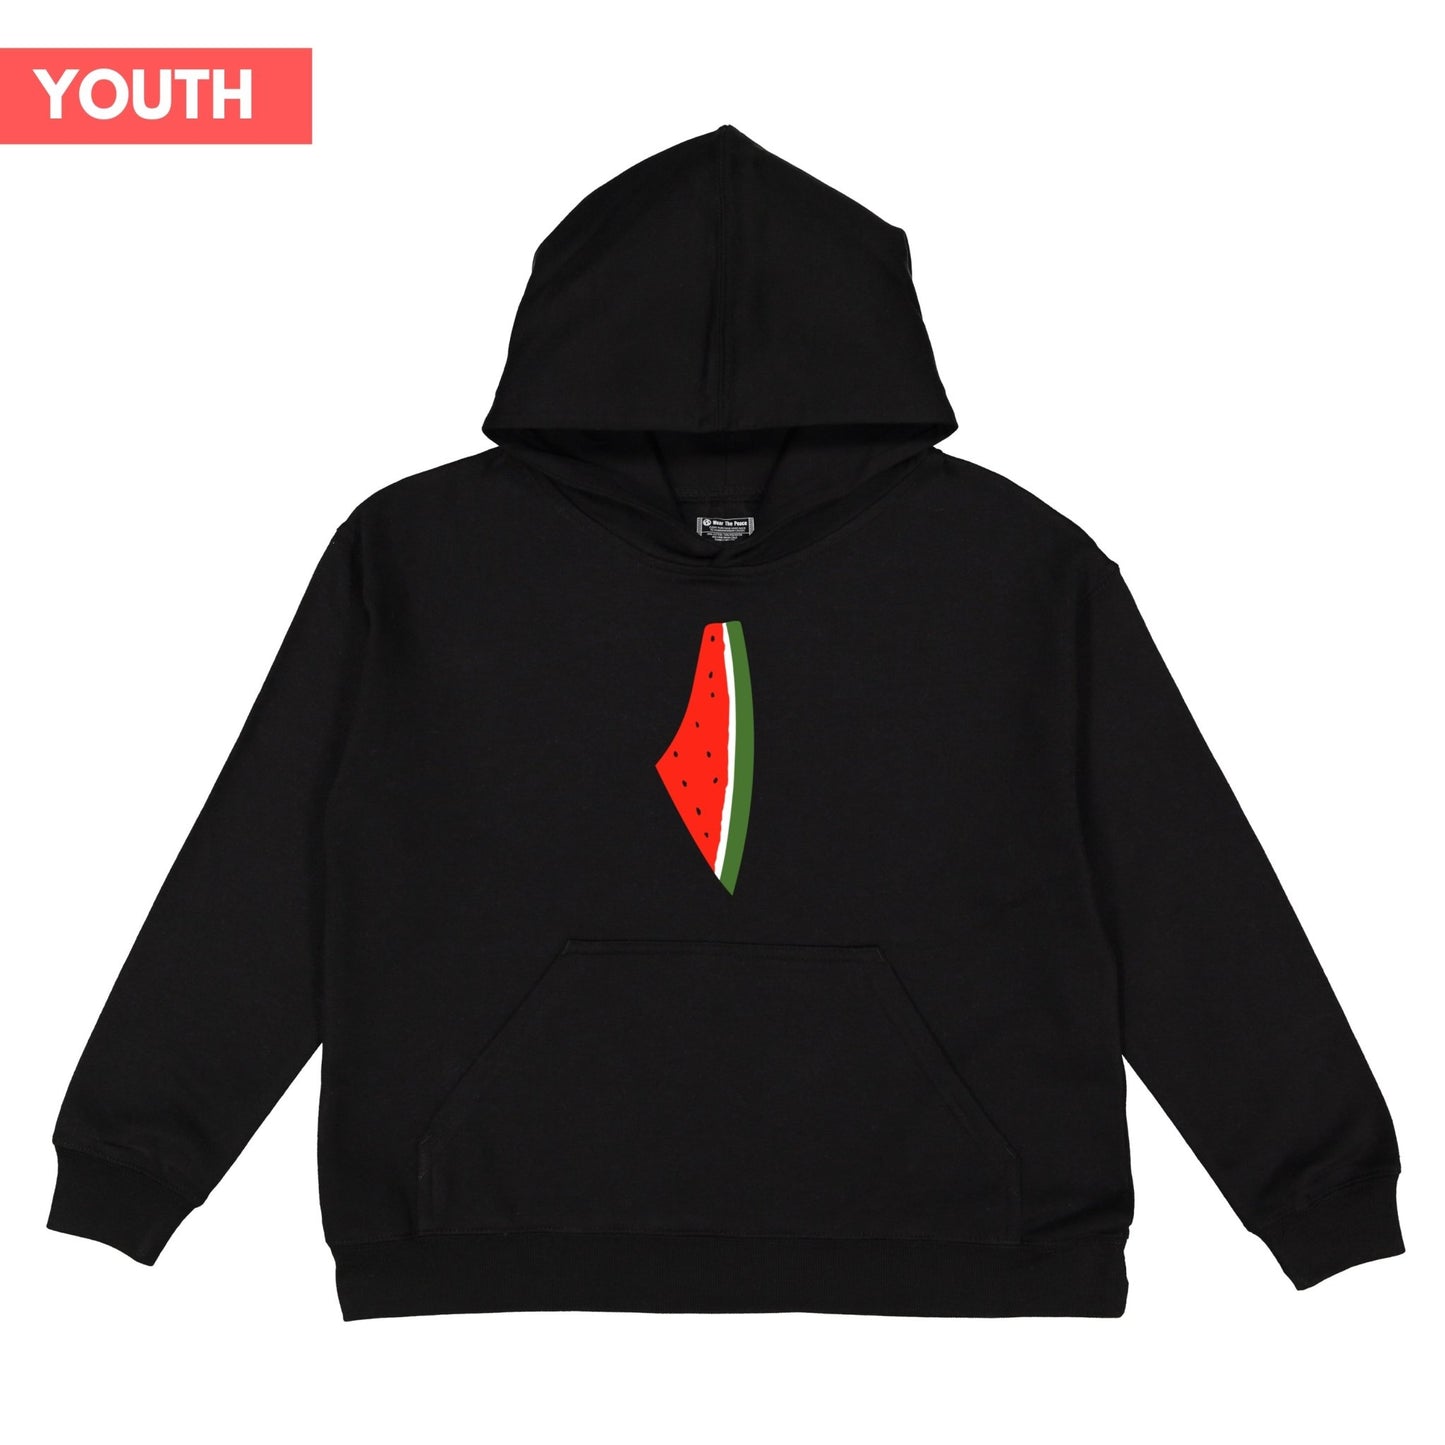 Youth Freedom Melon Hoodie Wear The Peace Youth hoodie XS